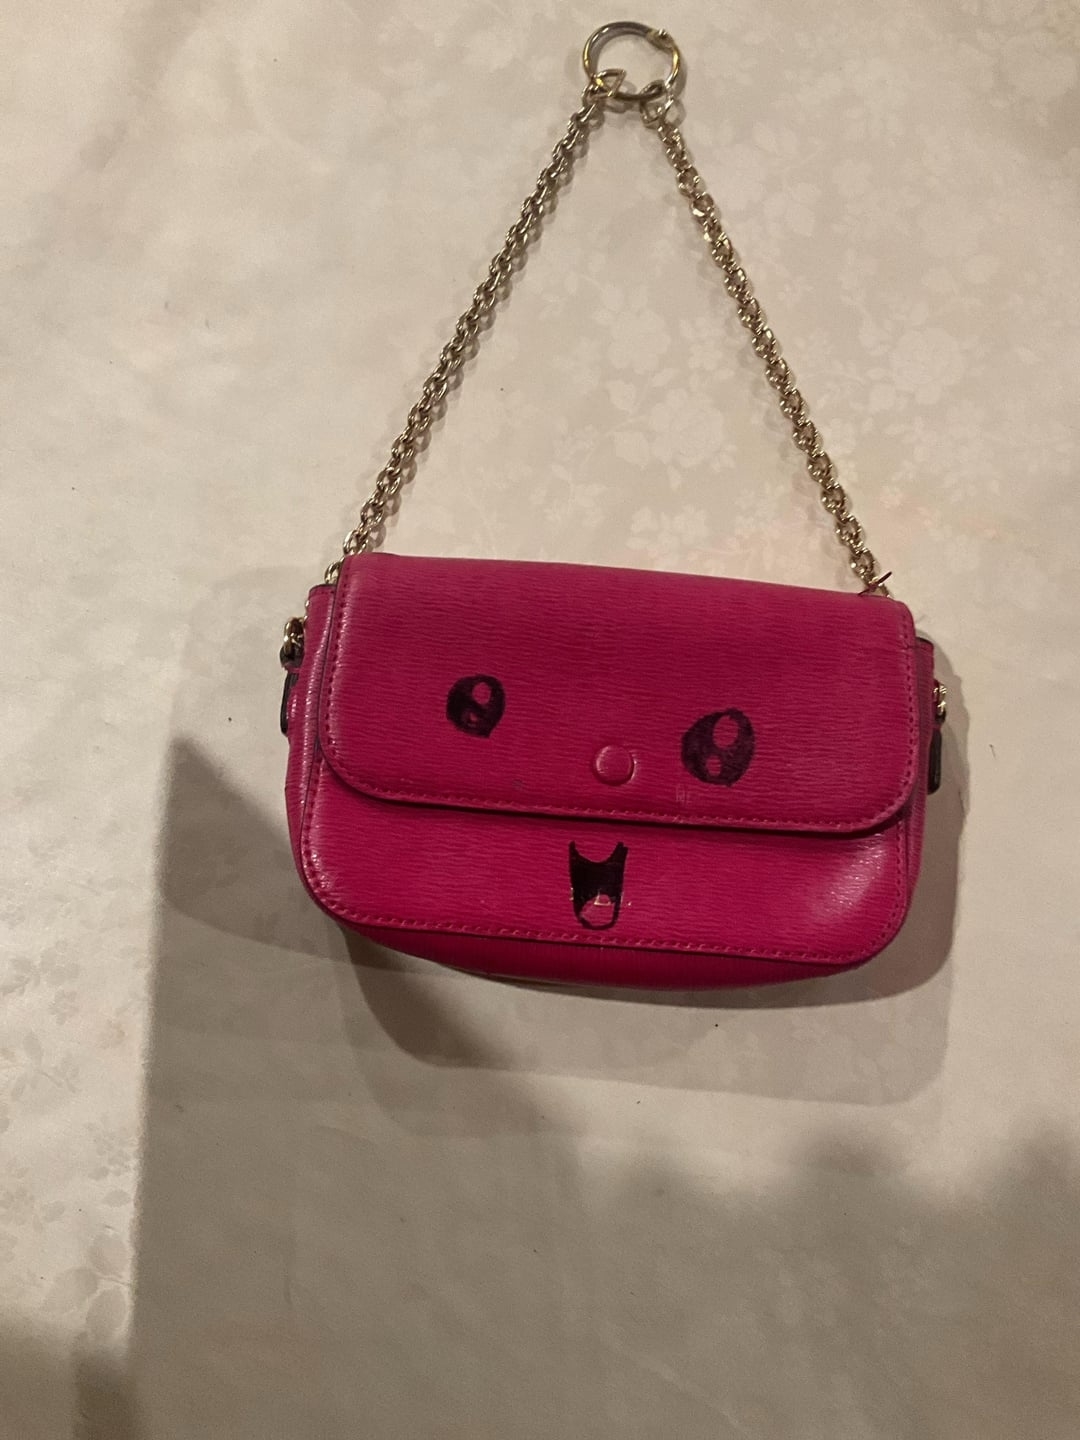 Small pink purse with a chain strap and facial features resembling a cat